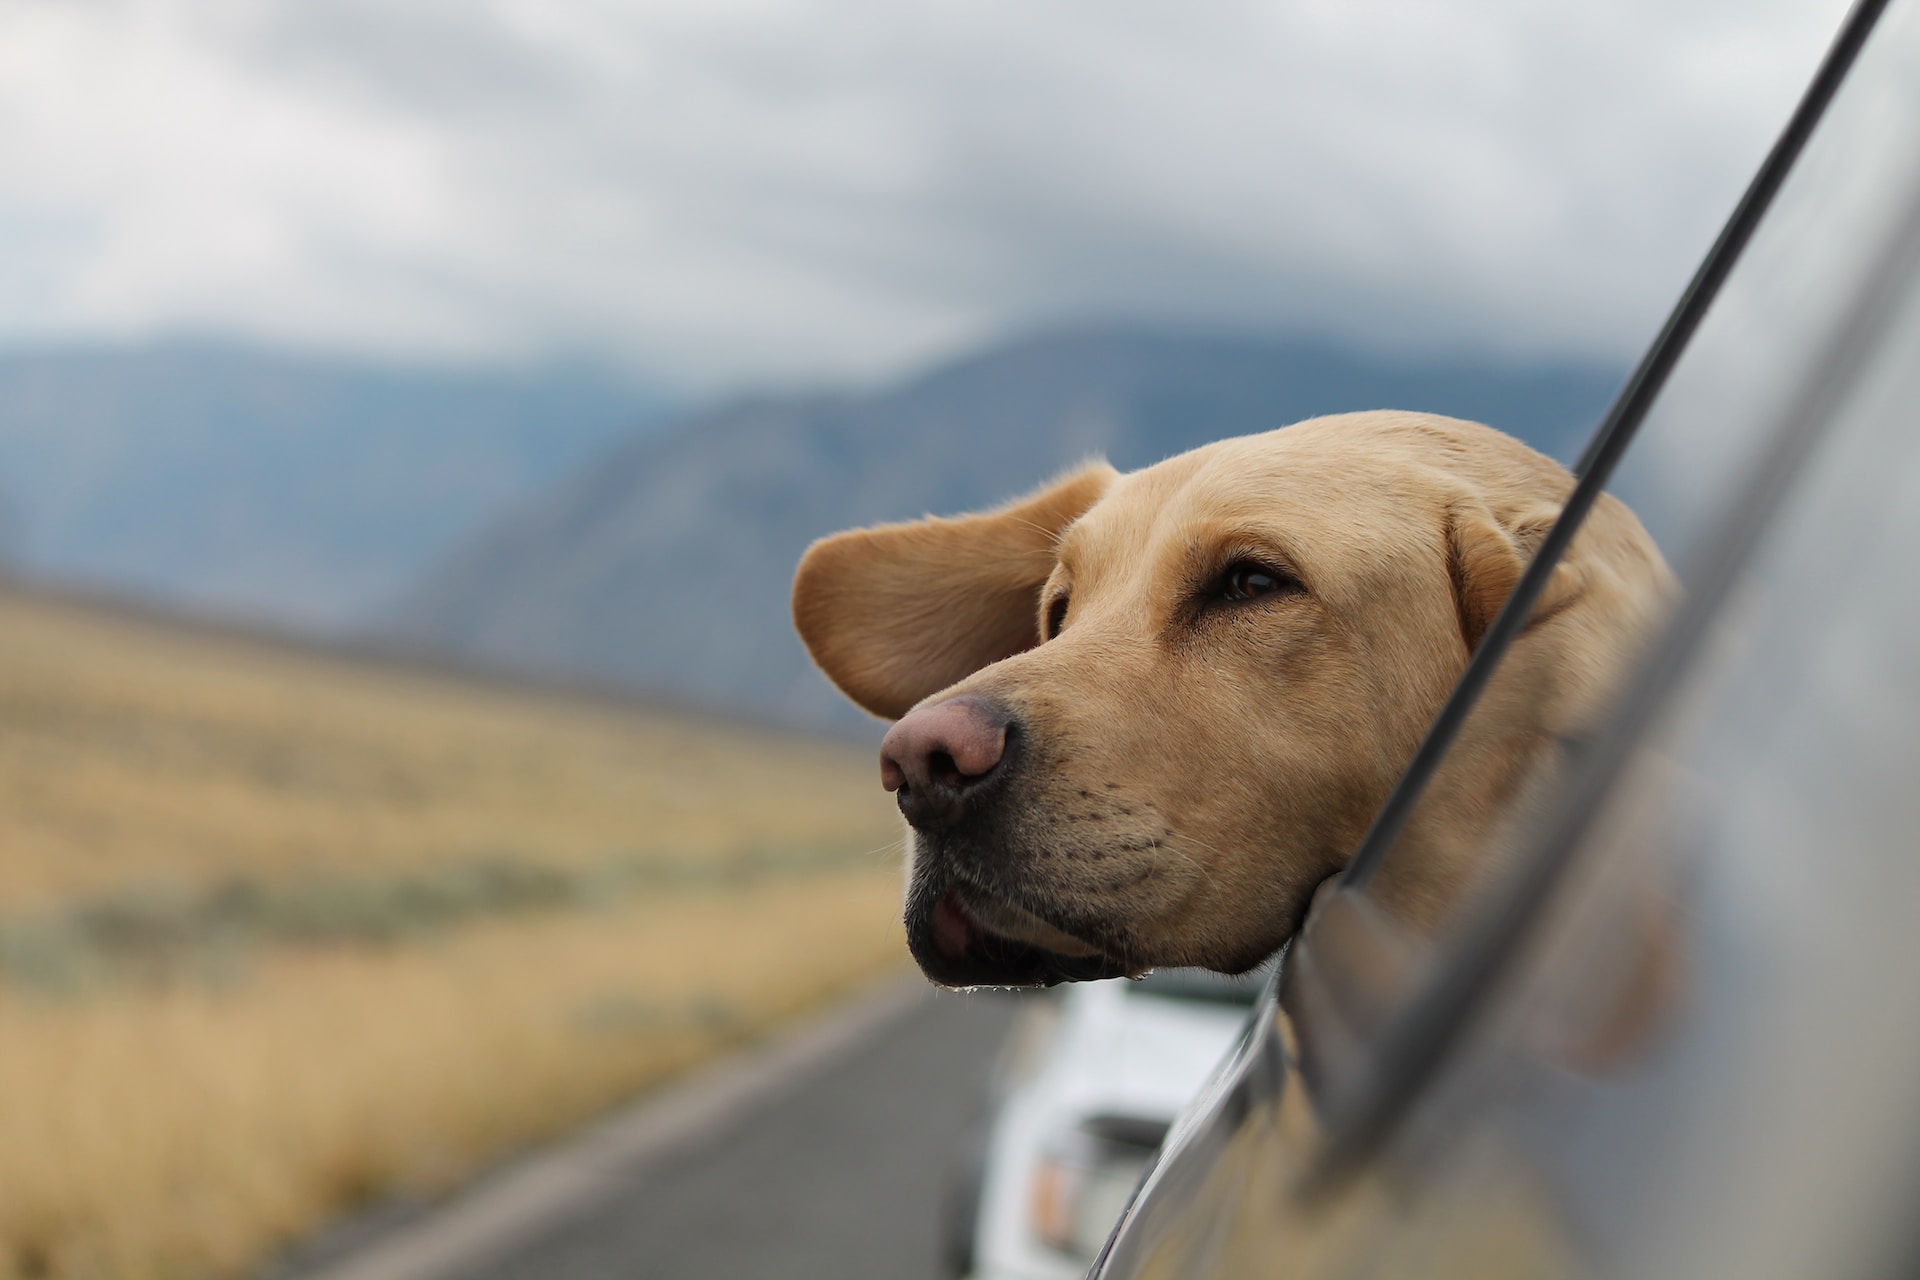 Best Destinations For Road Trips with Dogs in the USA